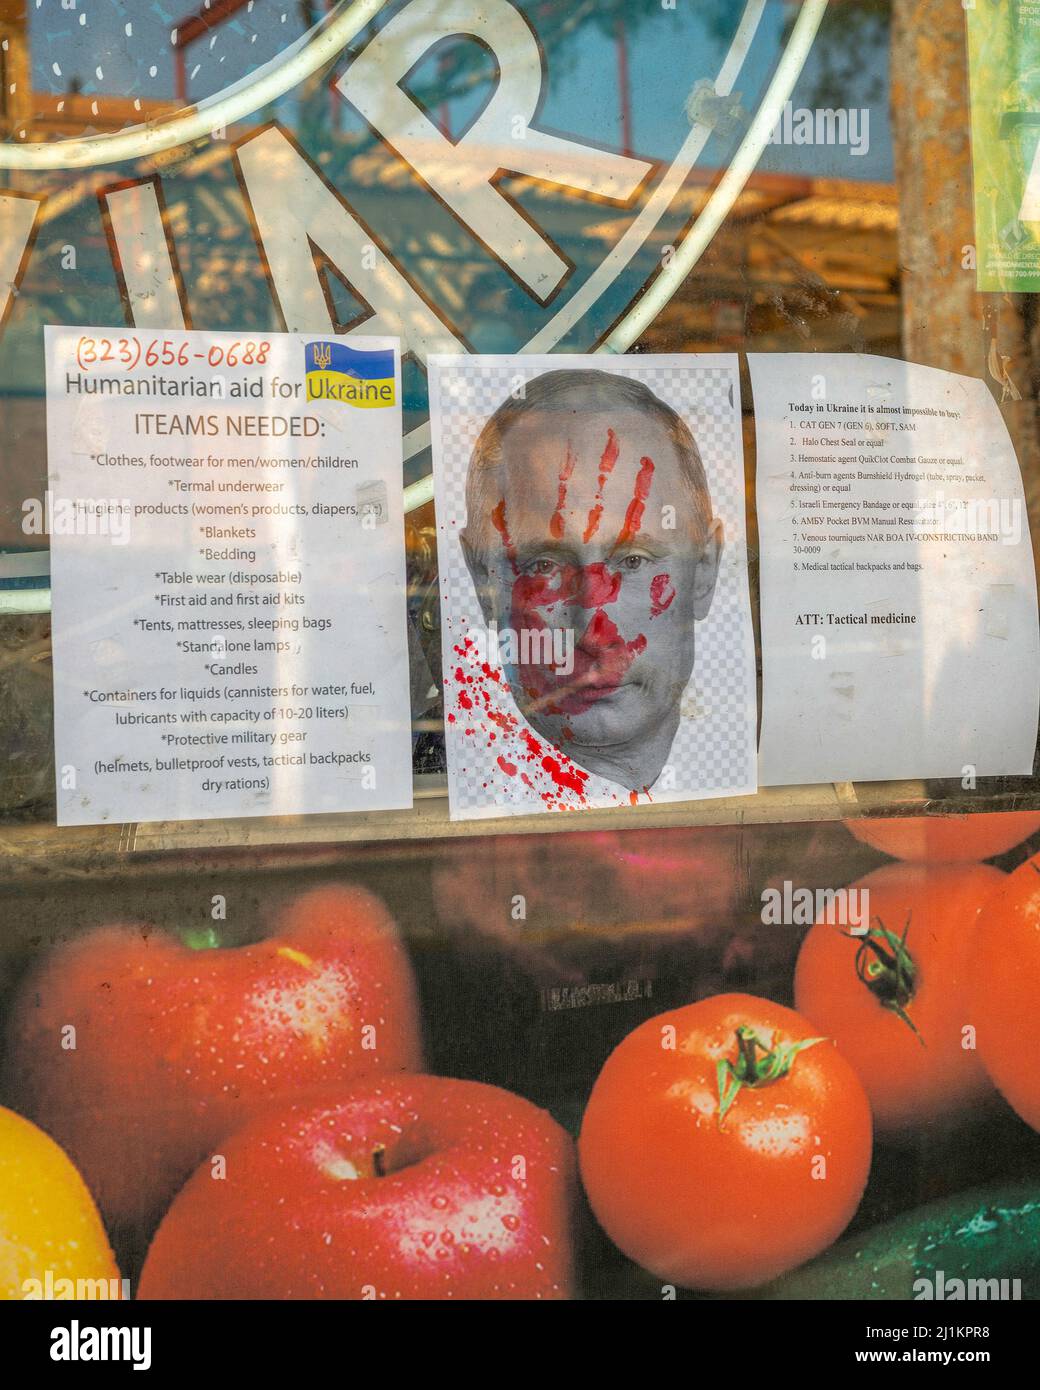 West Hollywood, CA, USA - March 26, 2022: Close up of a Ukrainian store window with flyers promoting aid for Ukraine as well as an image of Putin with Stock Photo